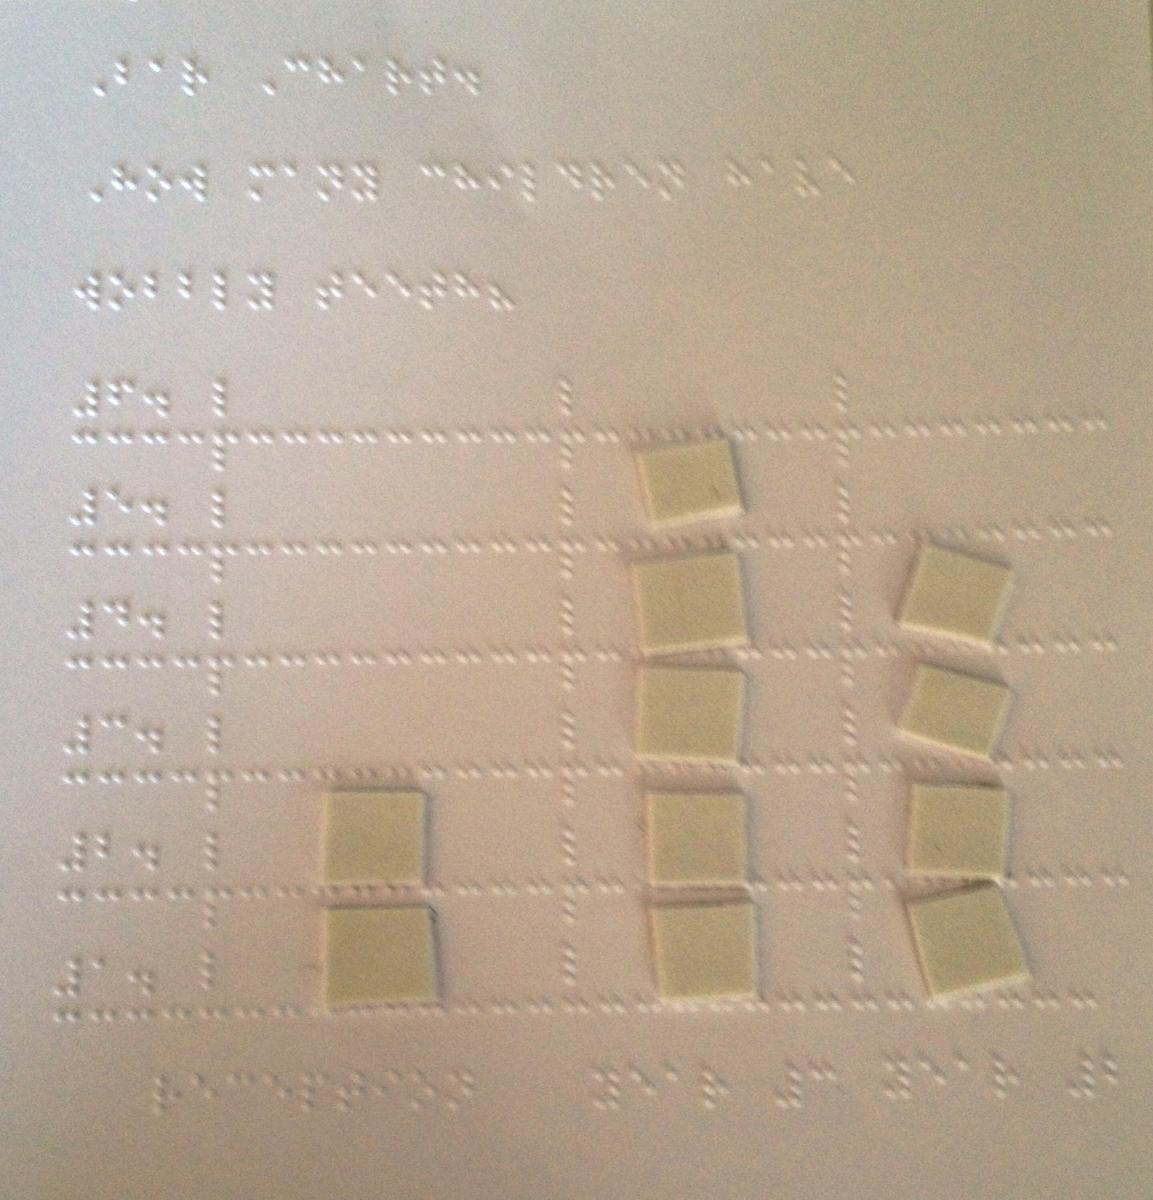 tactile bar chart in braille